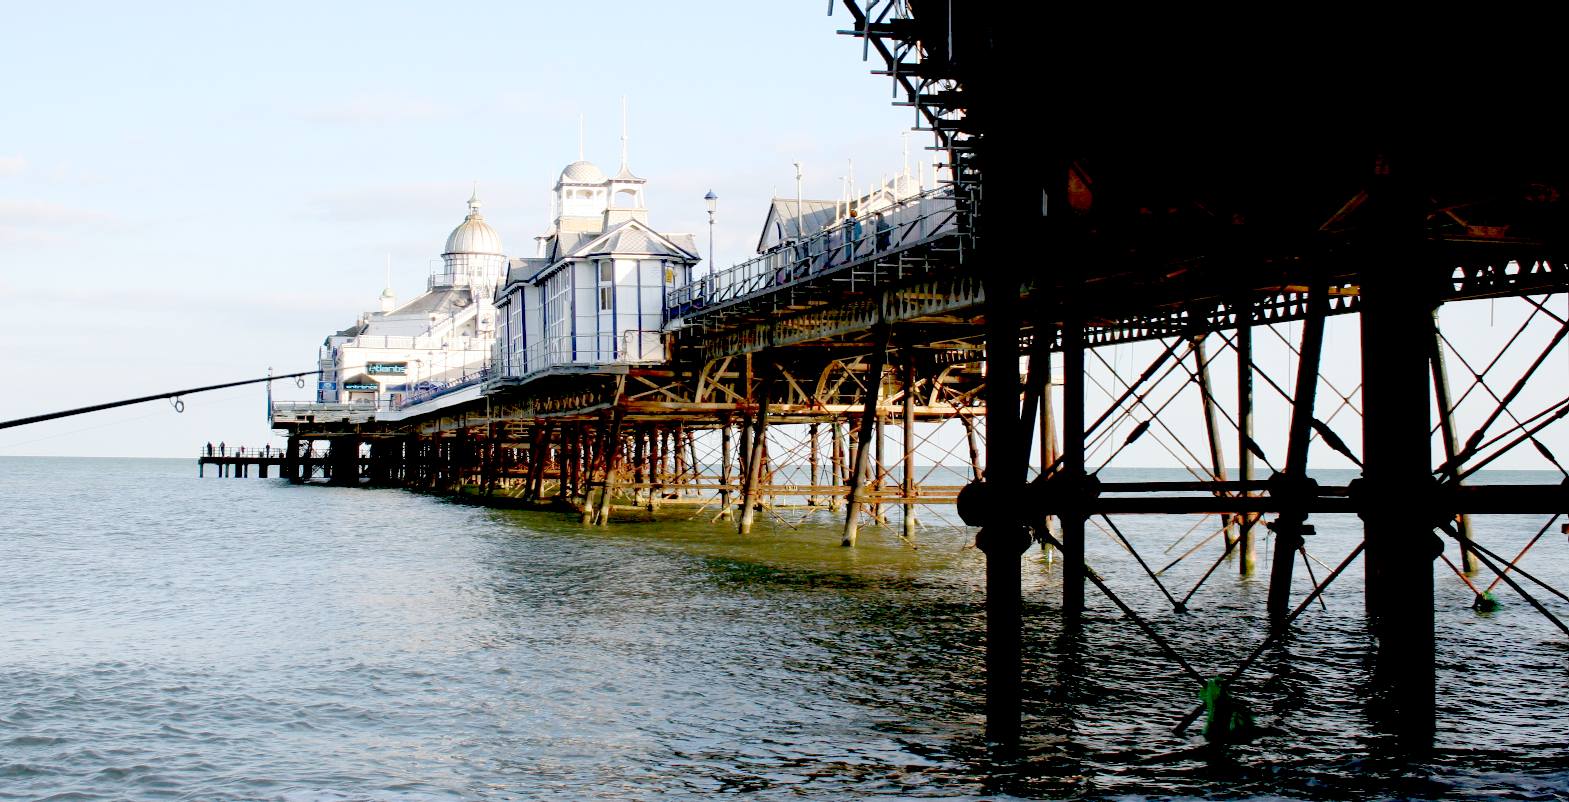 Eastbourne pier is a listed building owned by Sheikh Abid Gulzar